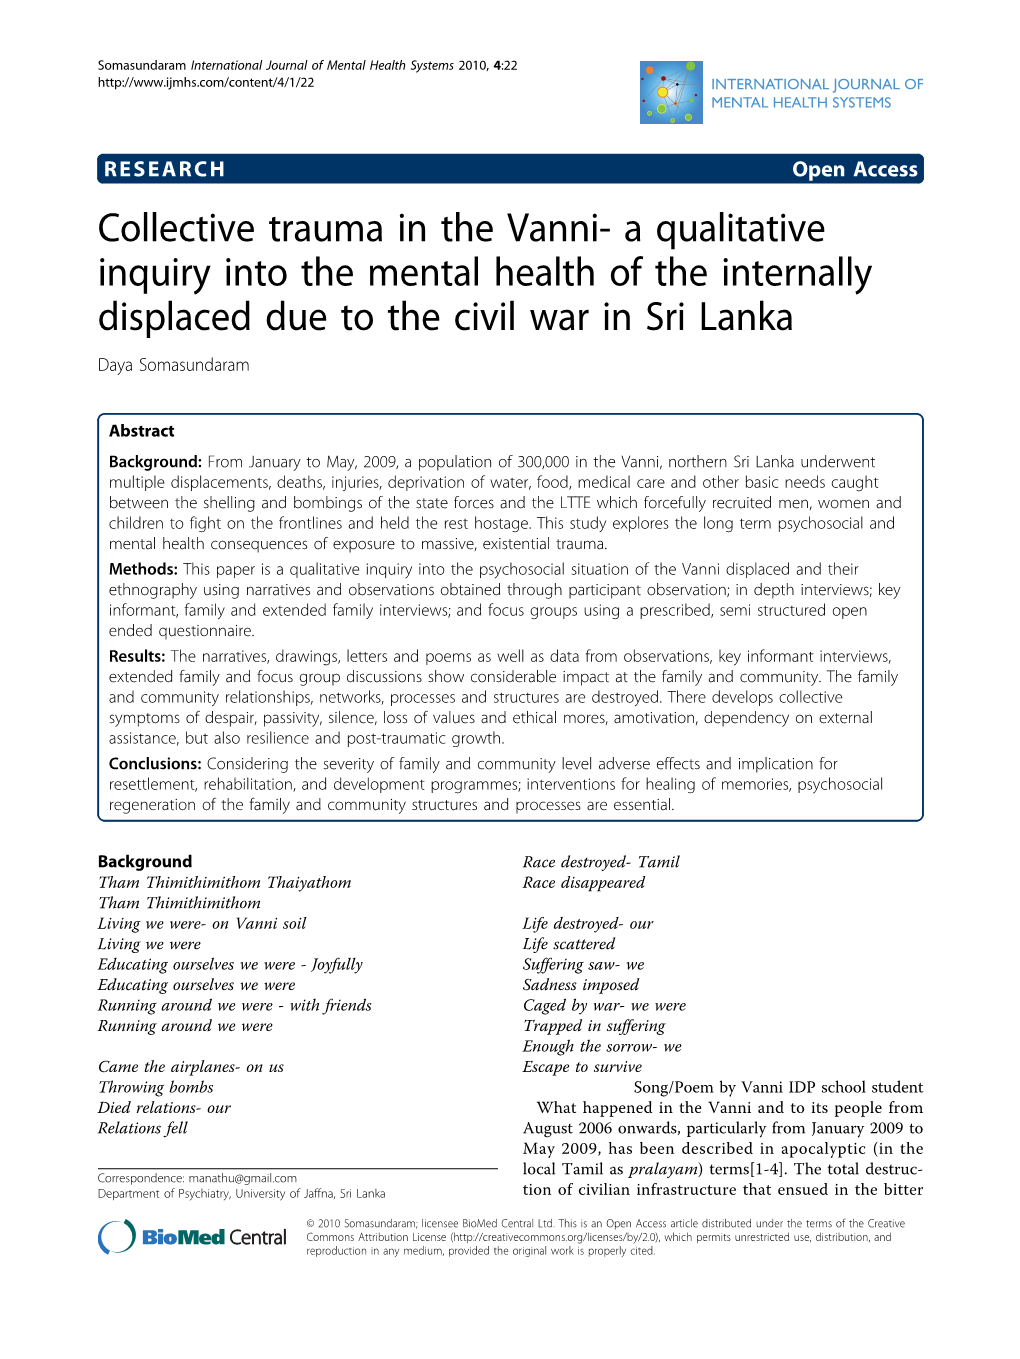 Collective Trauma in the Vanni- a Qualitative Inquiry Into the Mental Health of the Internally Displaced Due to the Civil War in Sri Lanka Daya Somasundaram